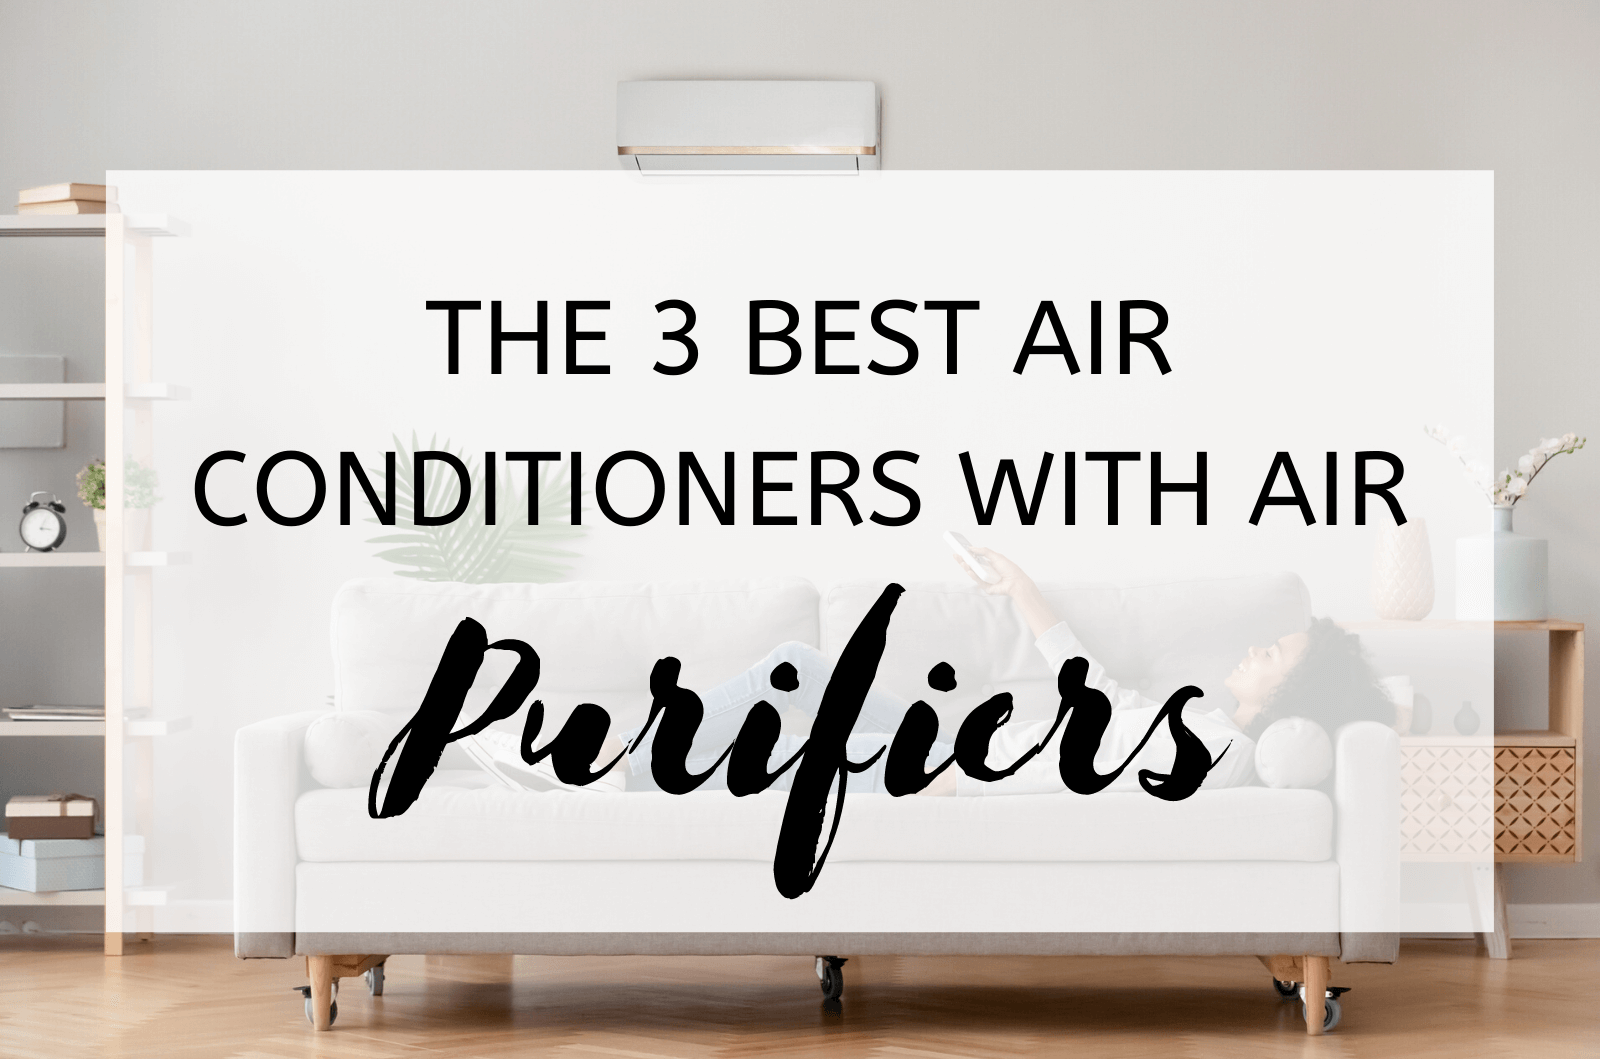 The 3 Best Air Conditioners With Air Purifiers